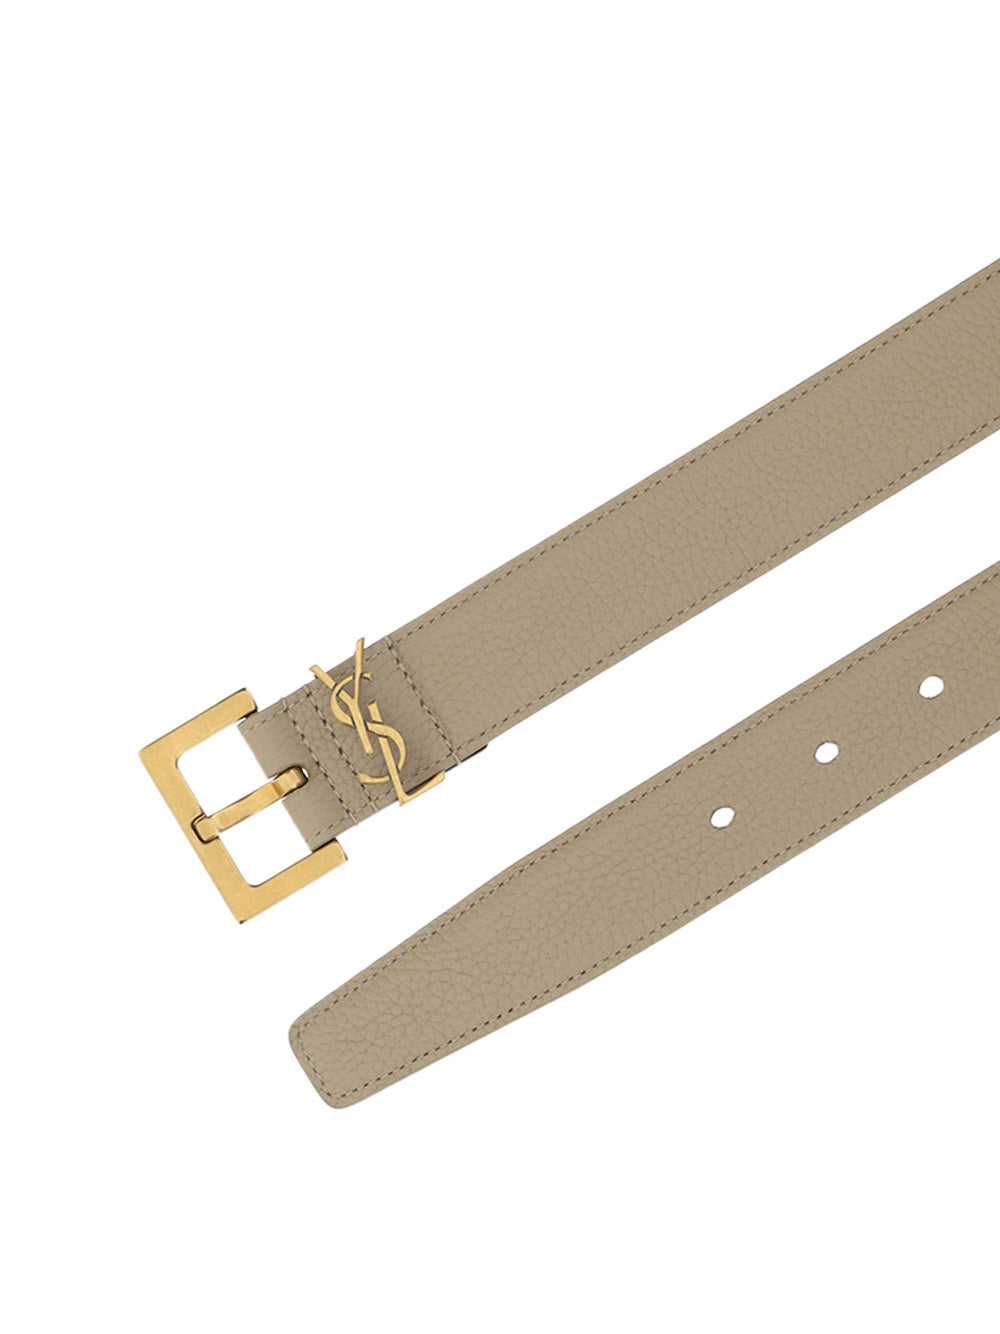 Cassandre Belt With Square Buckle in Grained Leather - Sea Salt